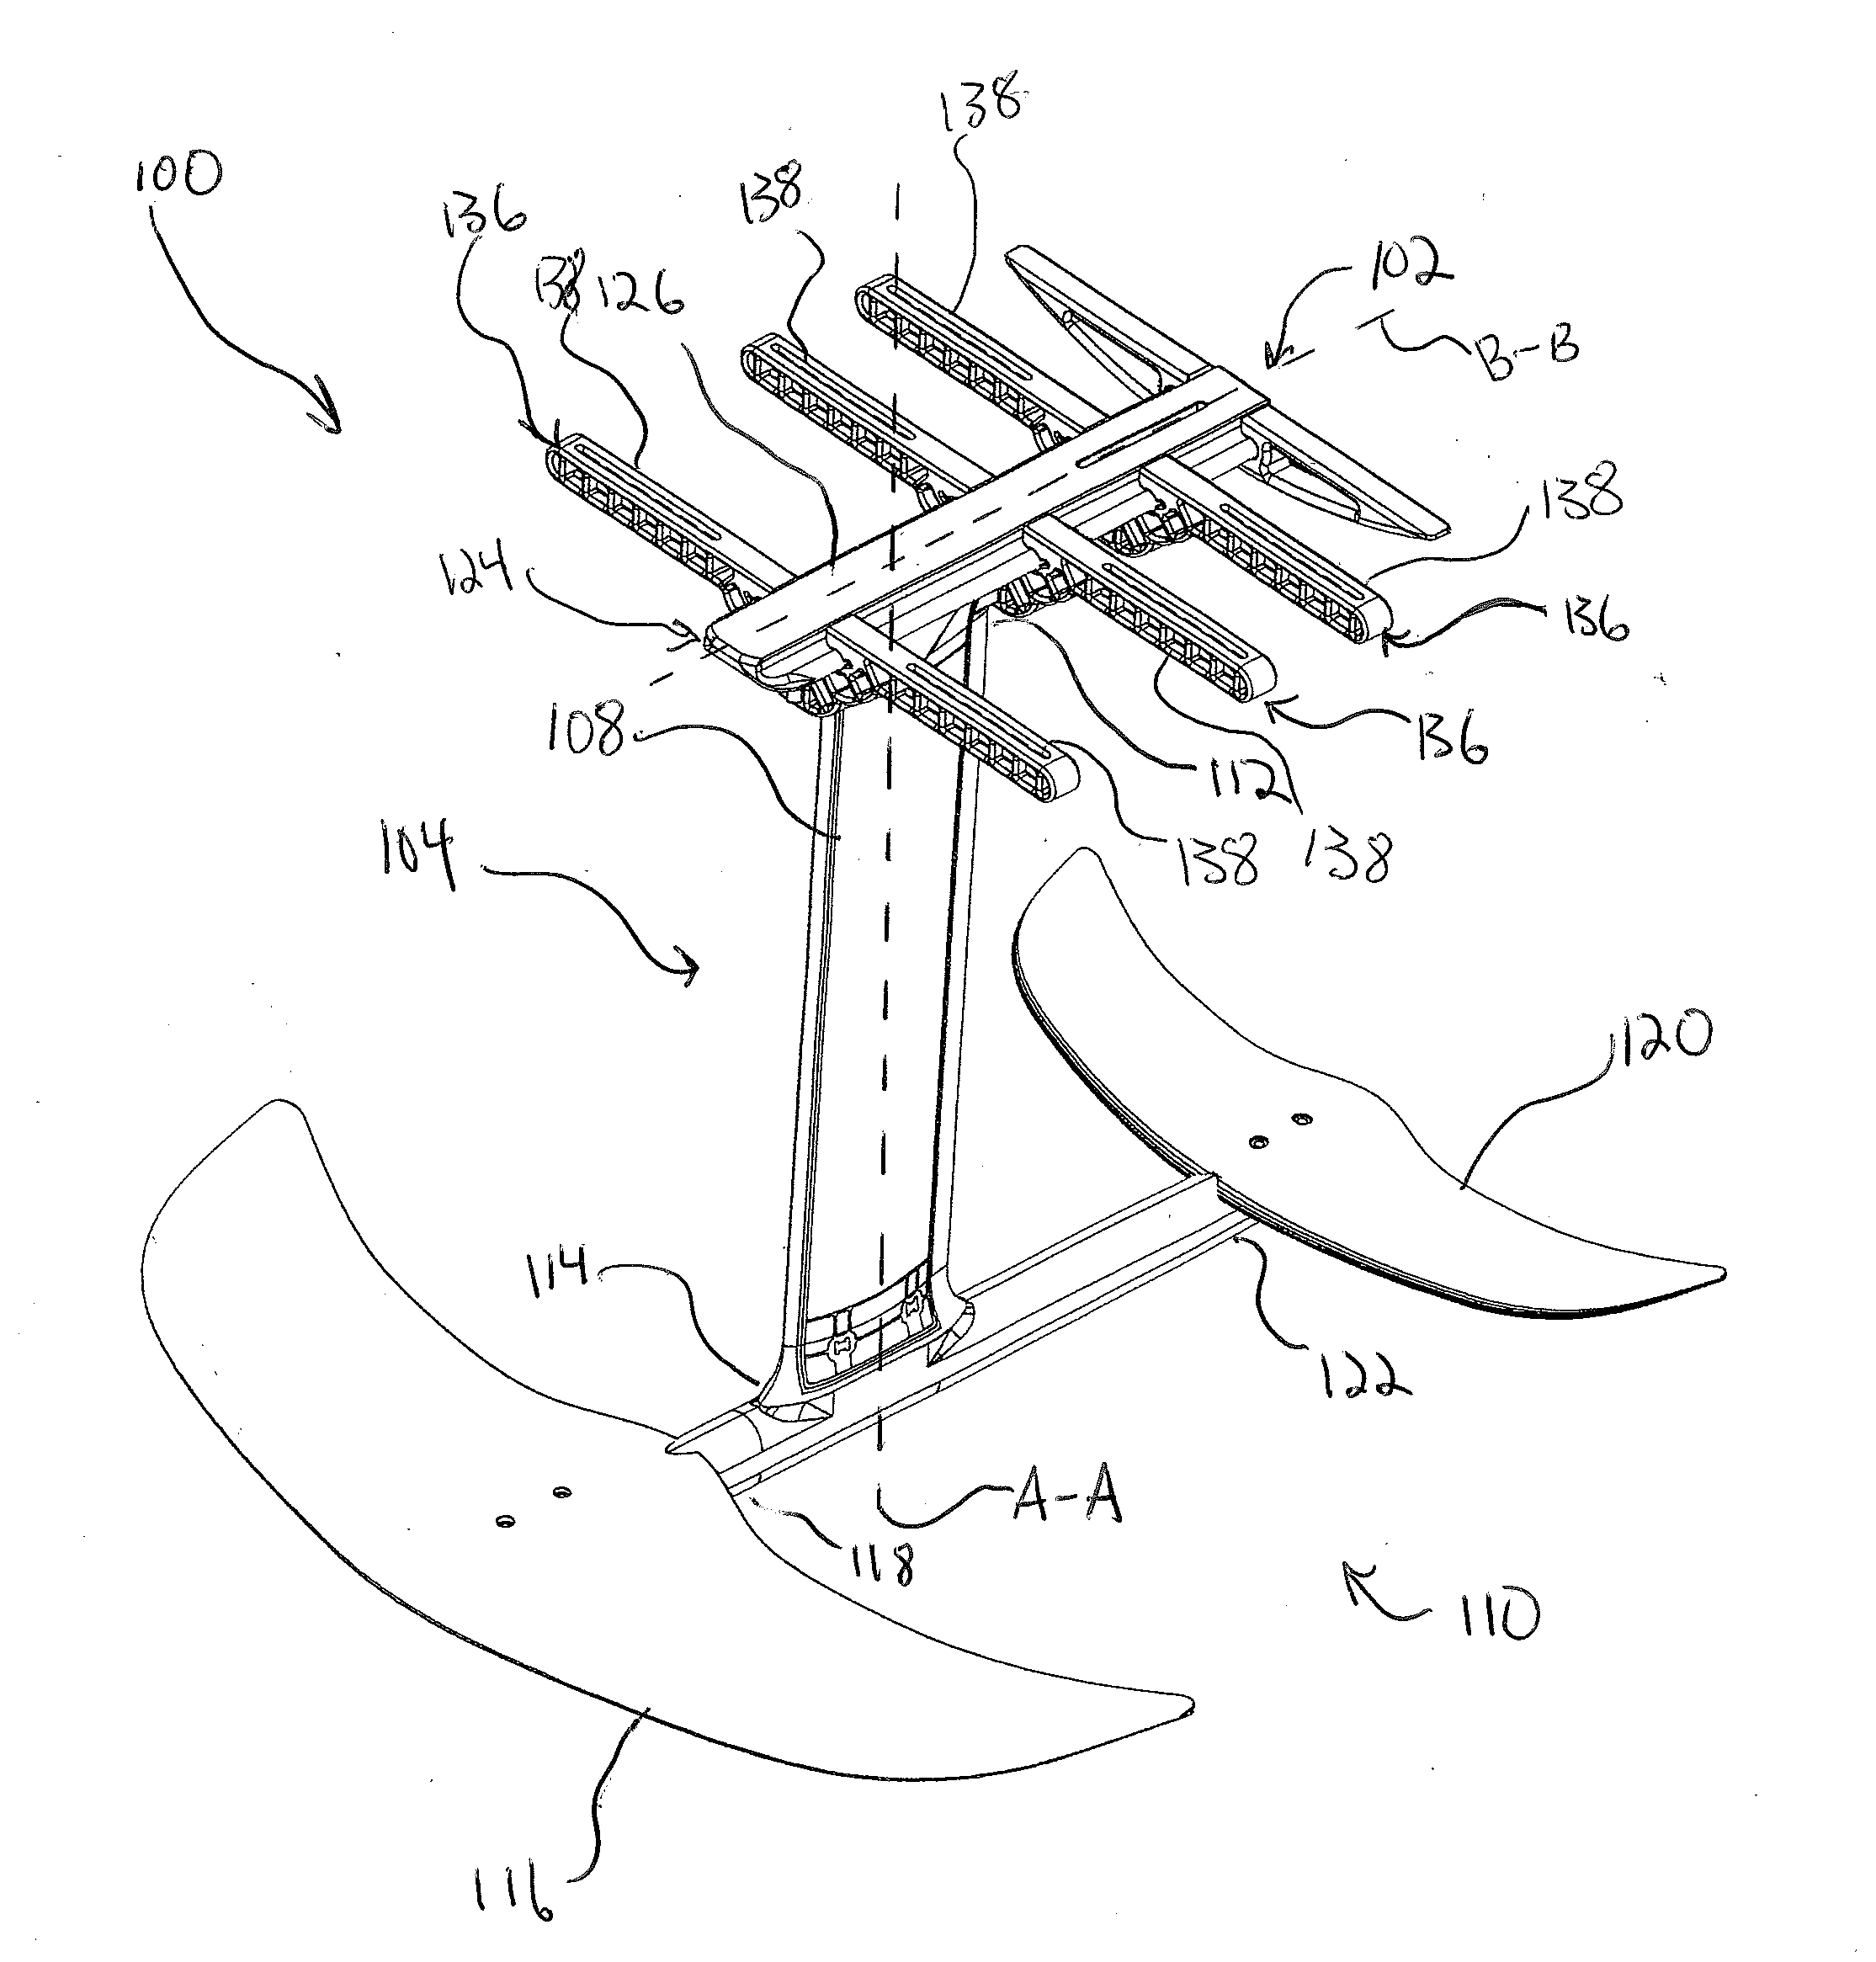 Universal Hydrofoil Connector System and Method of Attachment